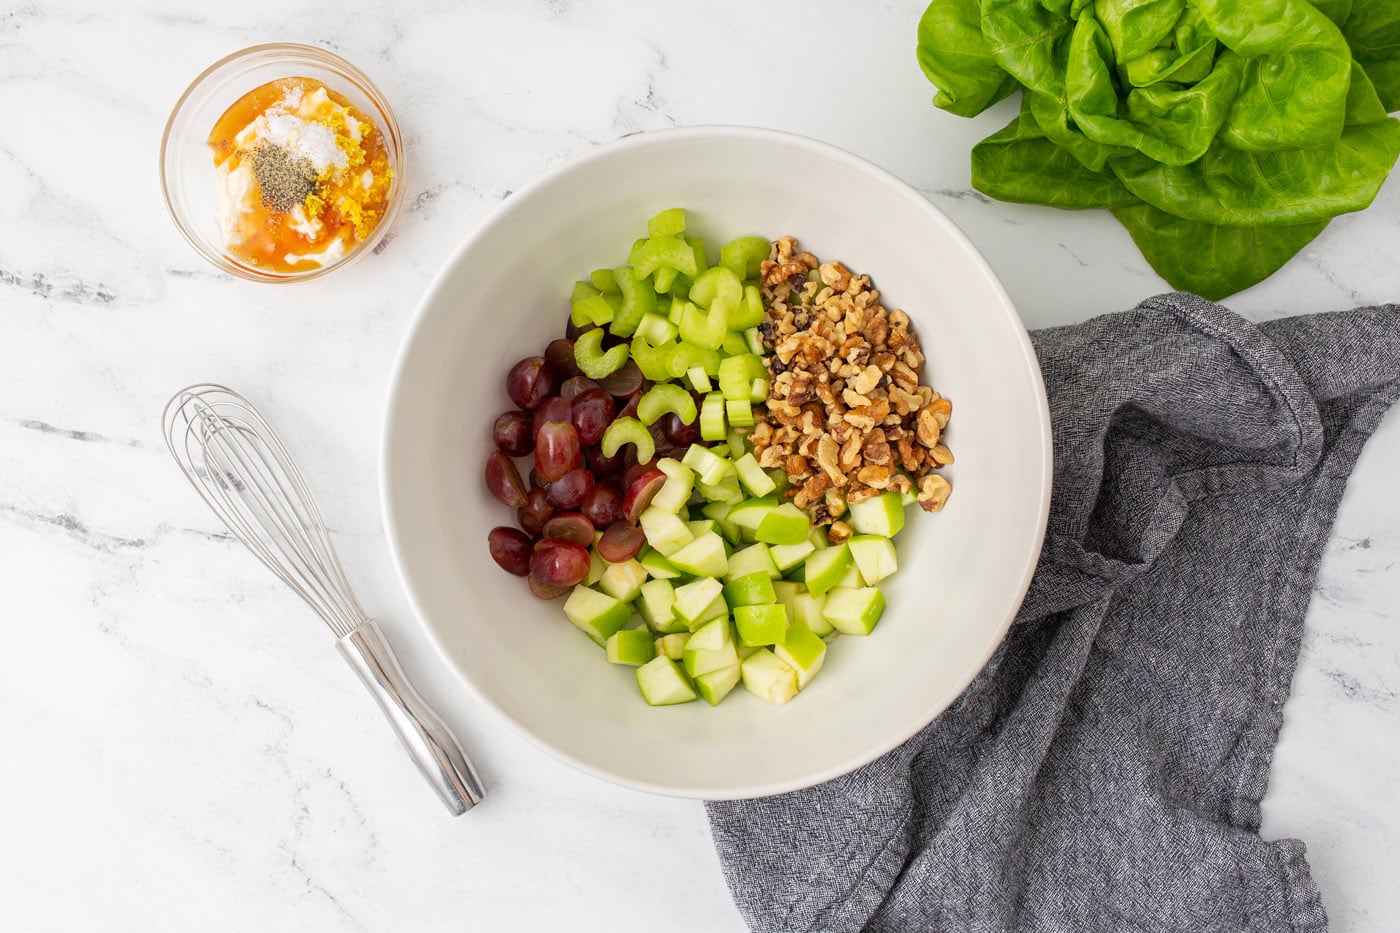 apples, celery, walnuts, and grapes in a bowl